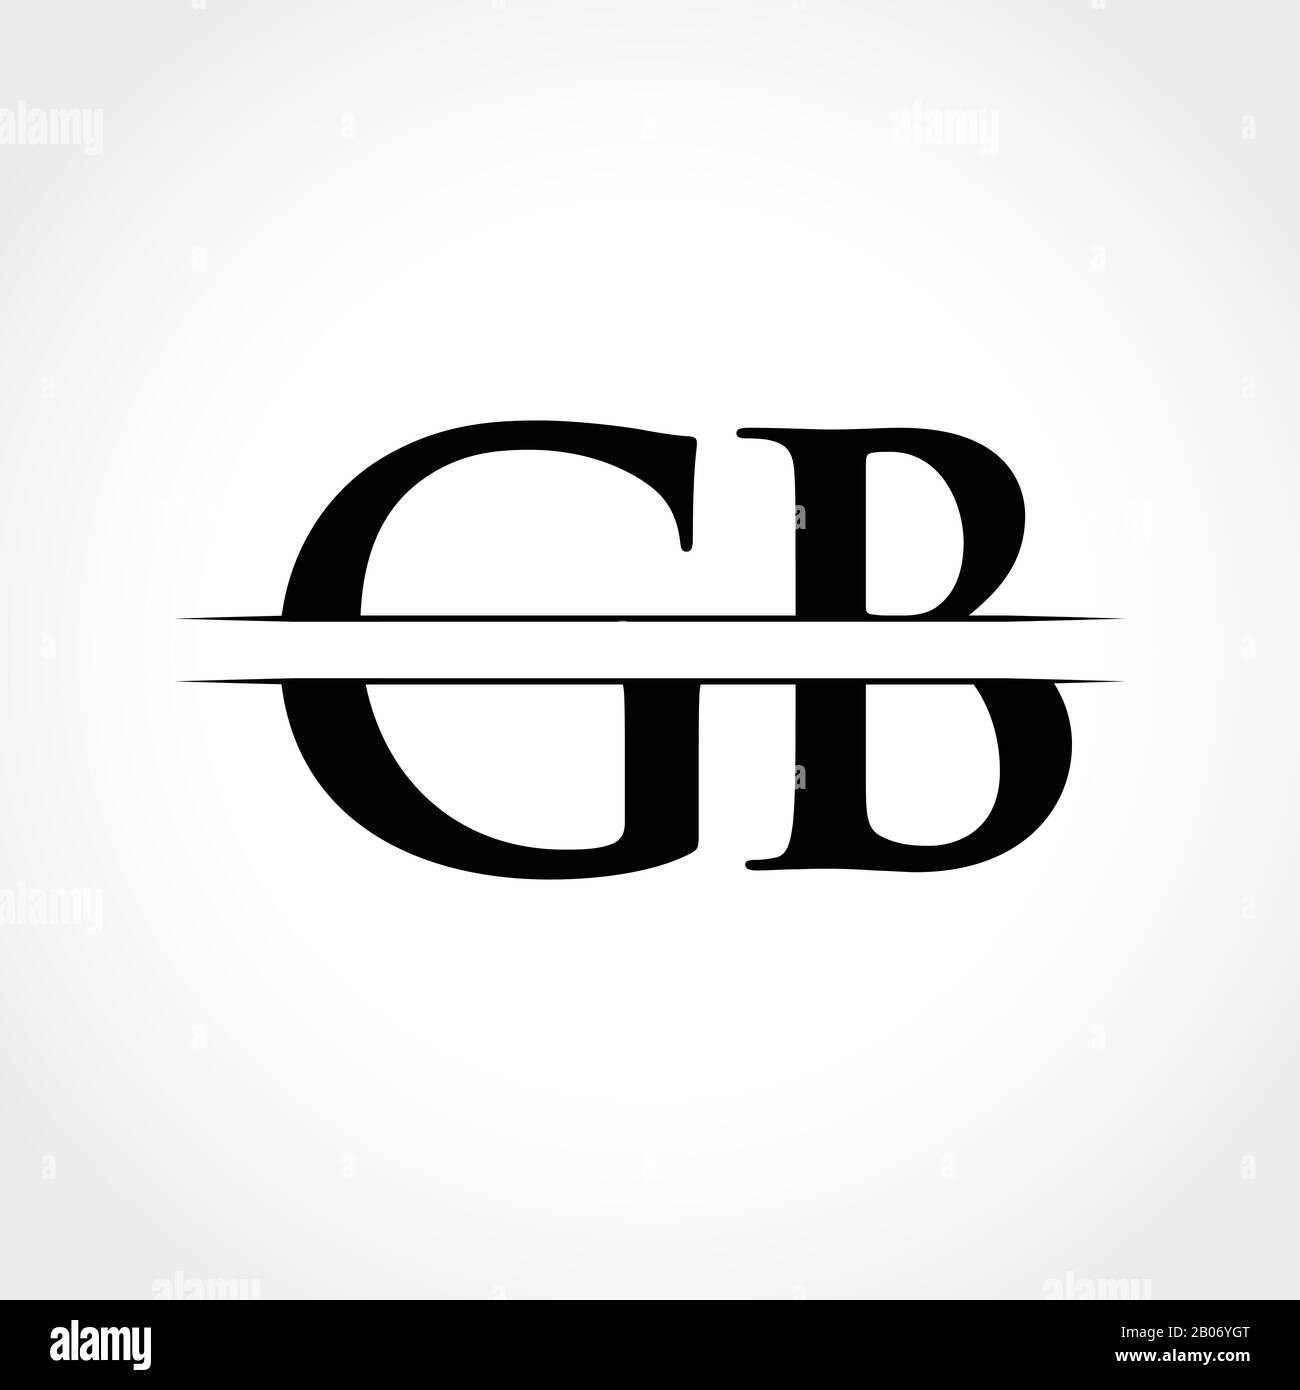 Gb logo design hi-res stock photography and images - Alamy